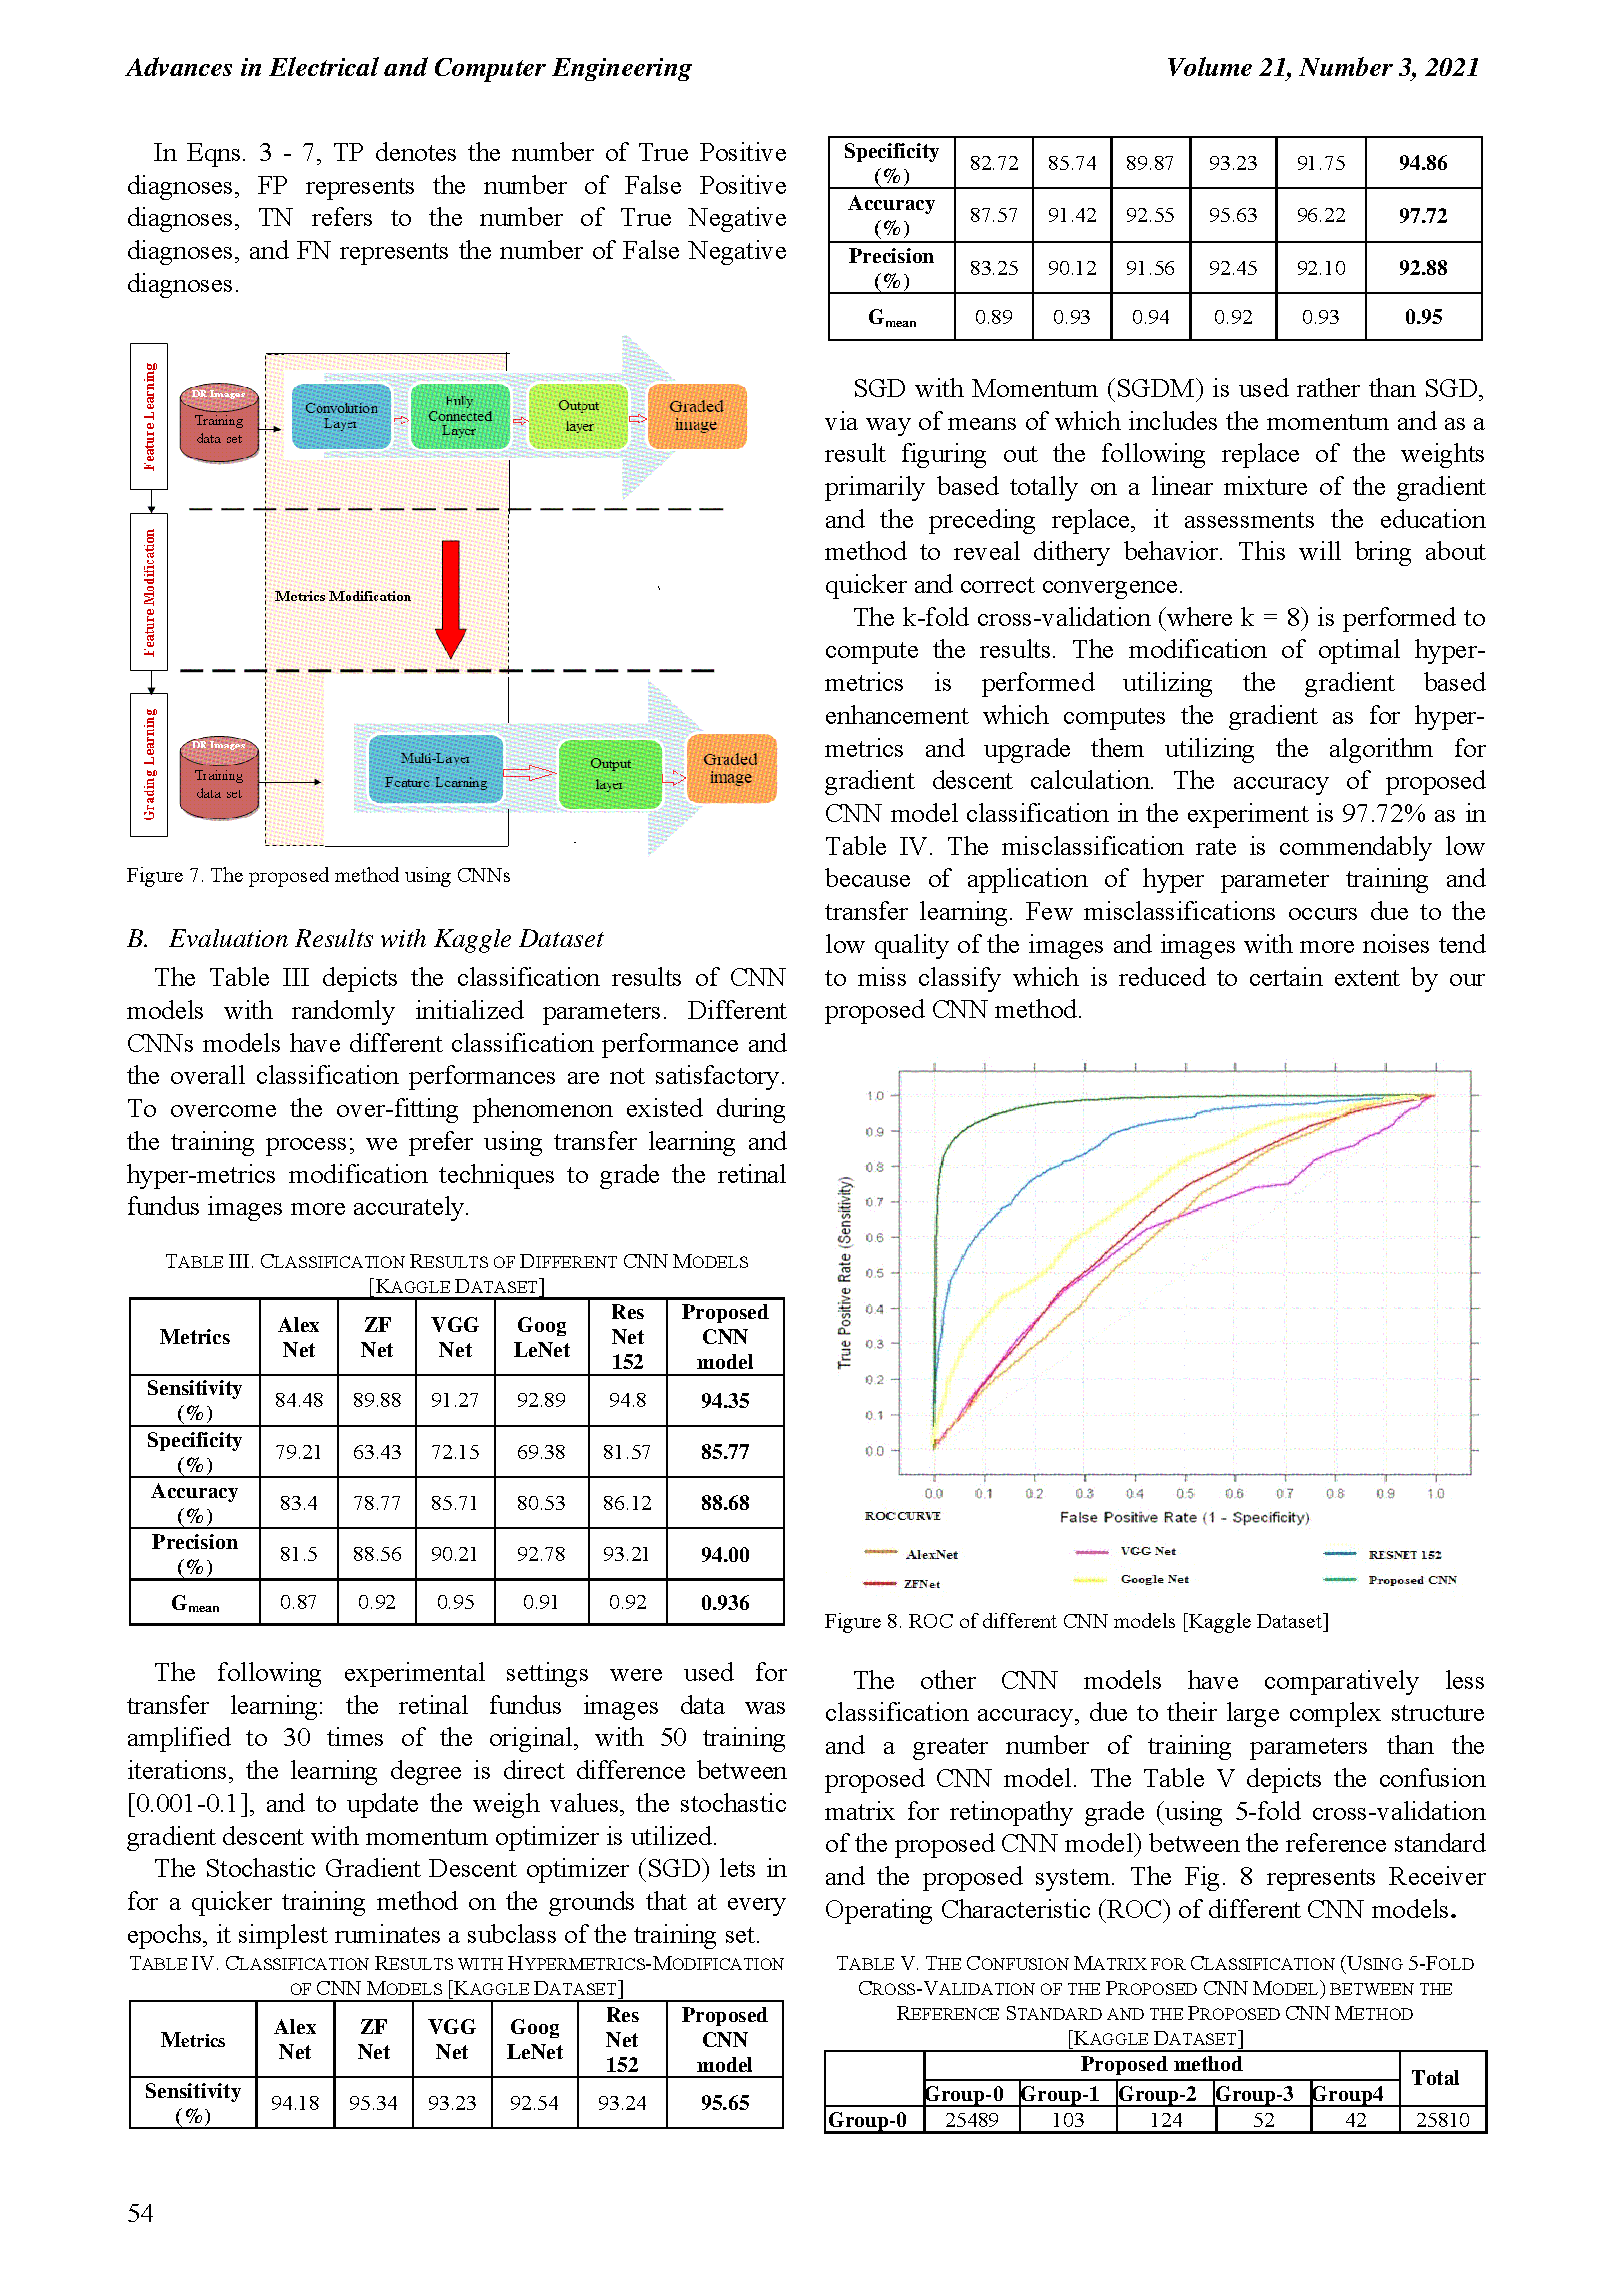 PDF Quickview for paper with DOI:10.4316/AECE.2021.03006